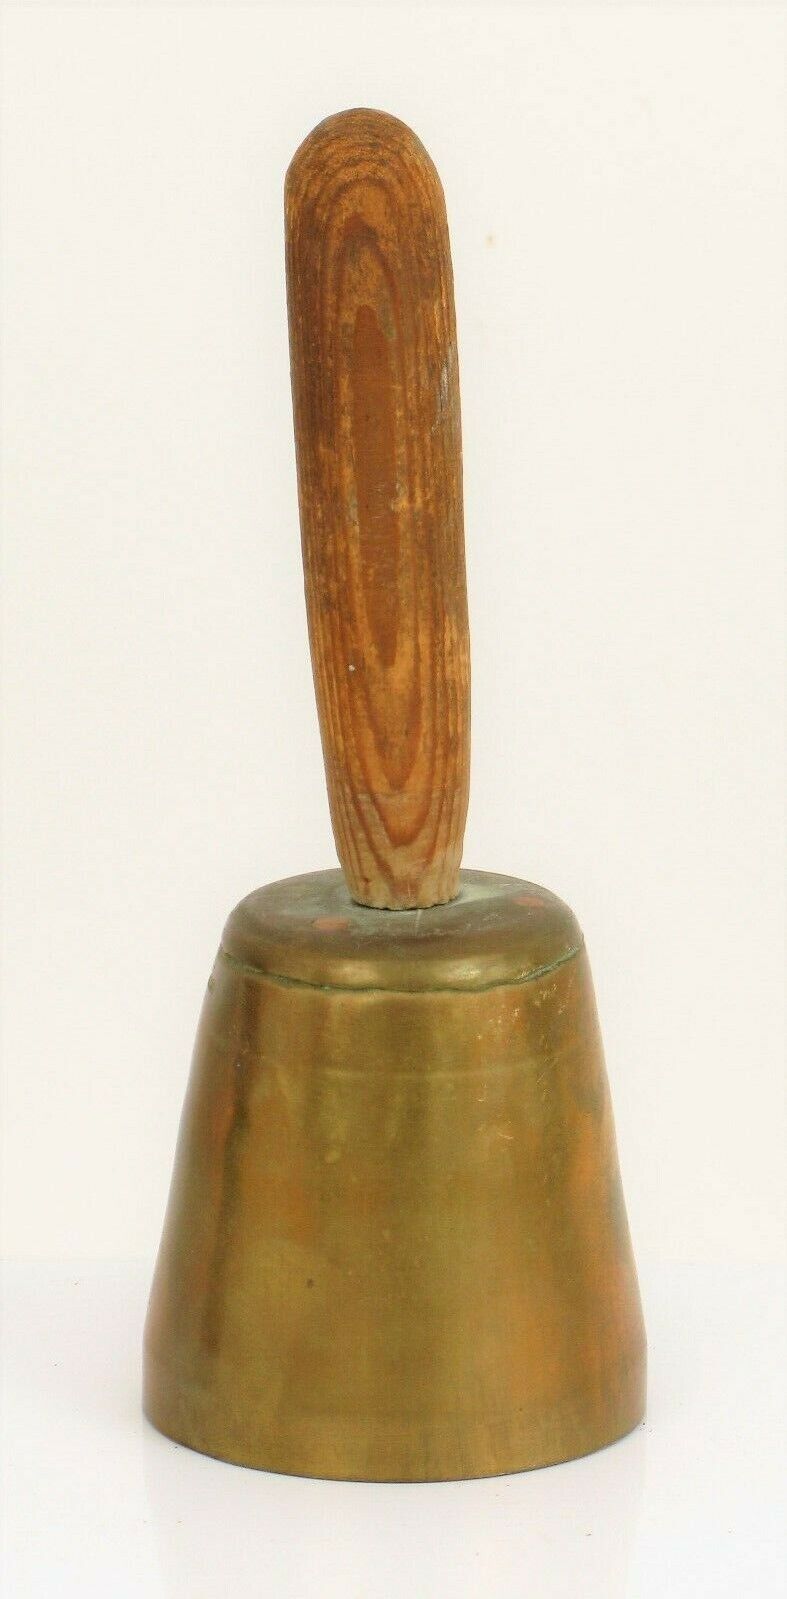 VINTAGE WWII ERA NORTH AFRICA POW CAMP HAND MADE TRENCH ART BELL WOOD HANDLE 